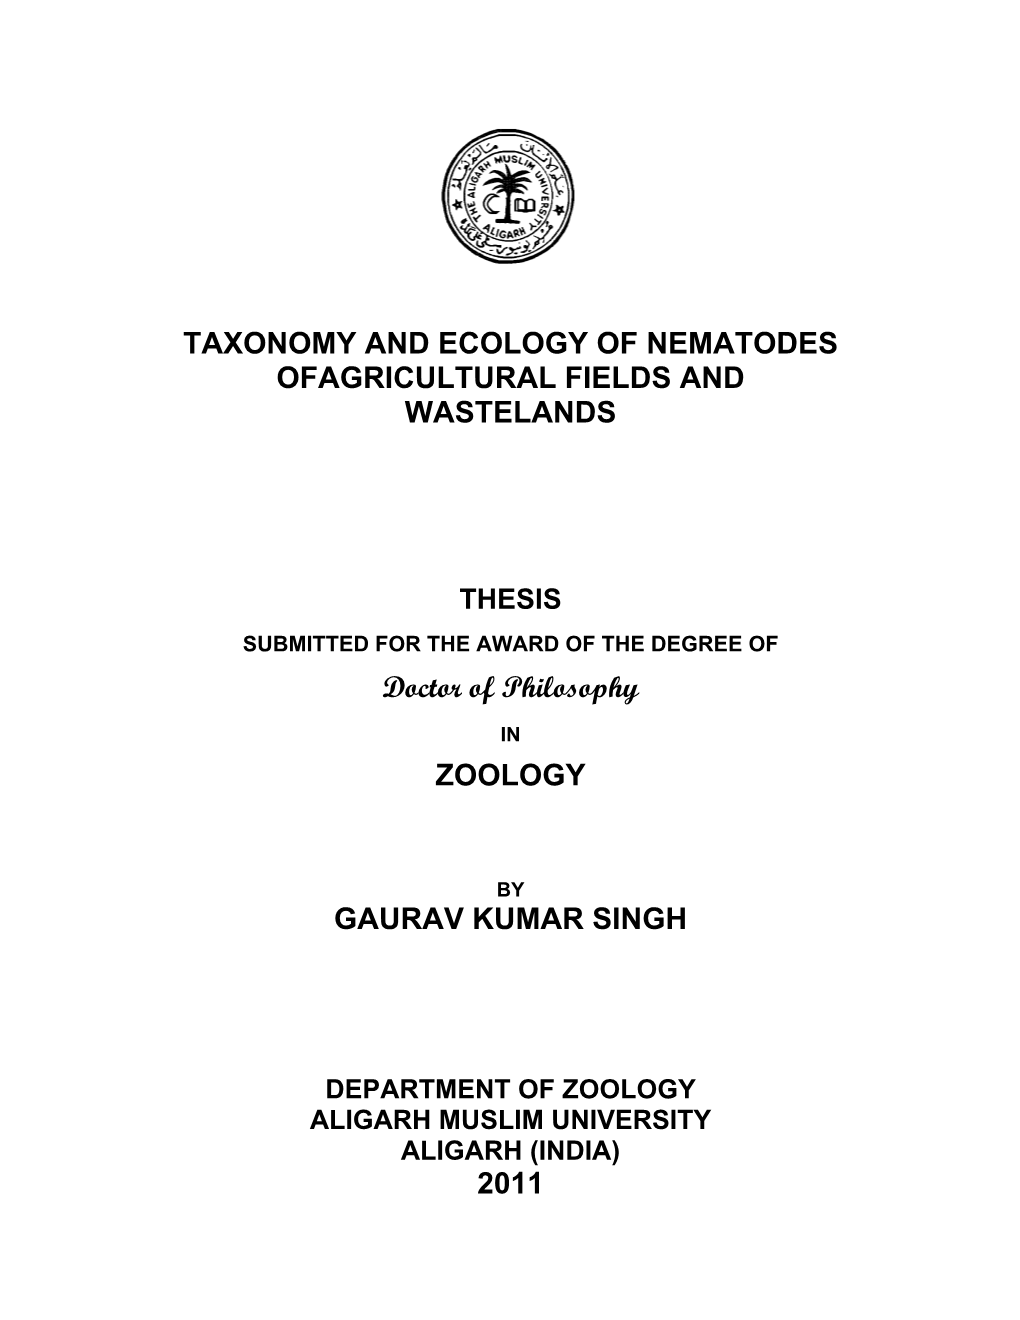 TAXONOMY and ECOLOGY of NEMATODES OFAGRICULTURAL FIELDS and WASTELANDS Doctor of Philosophy ZOOLOGY GAURAV KUMAR SINGH 2011